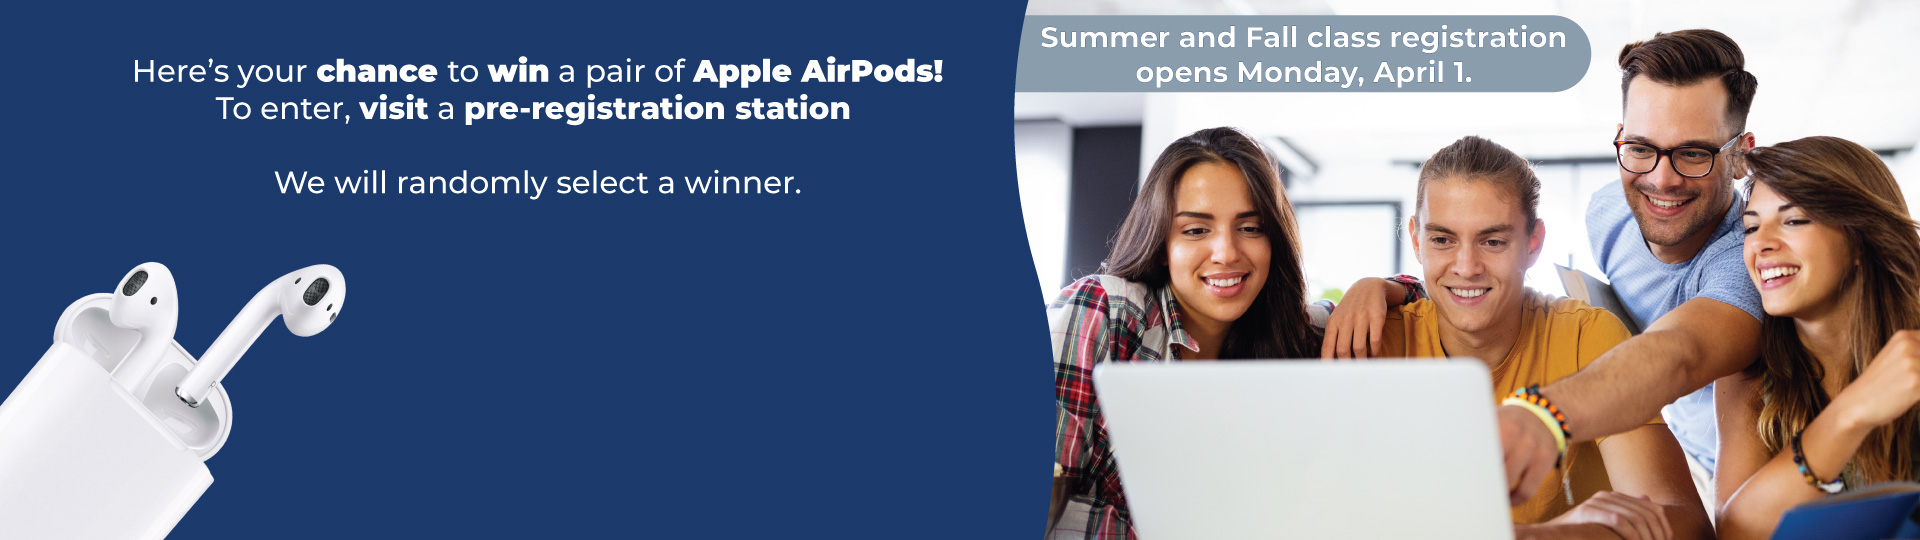 Pre Registration Station chance to win Airpods